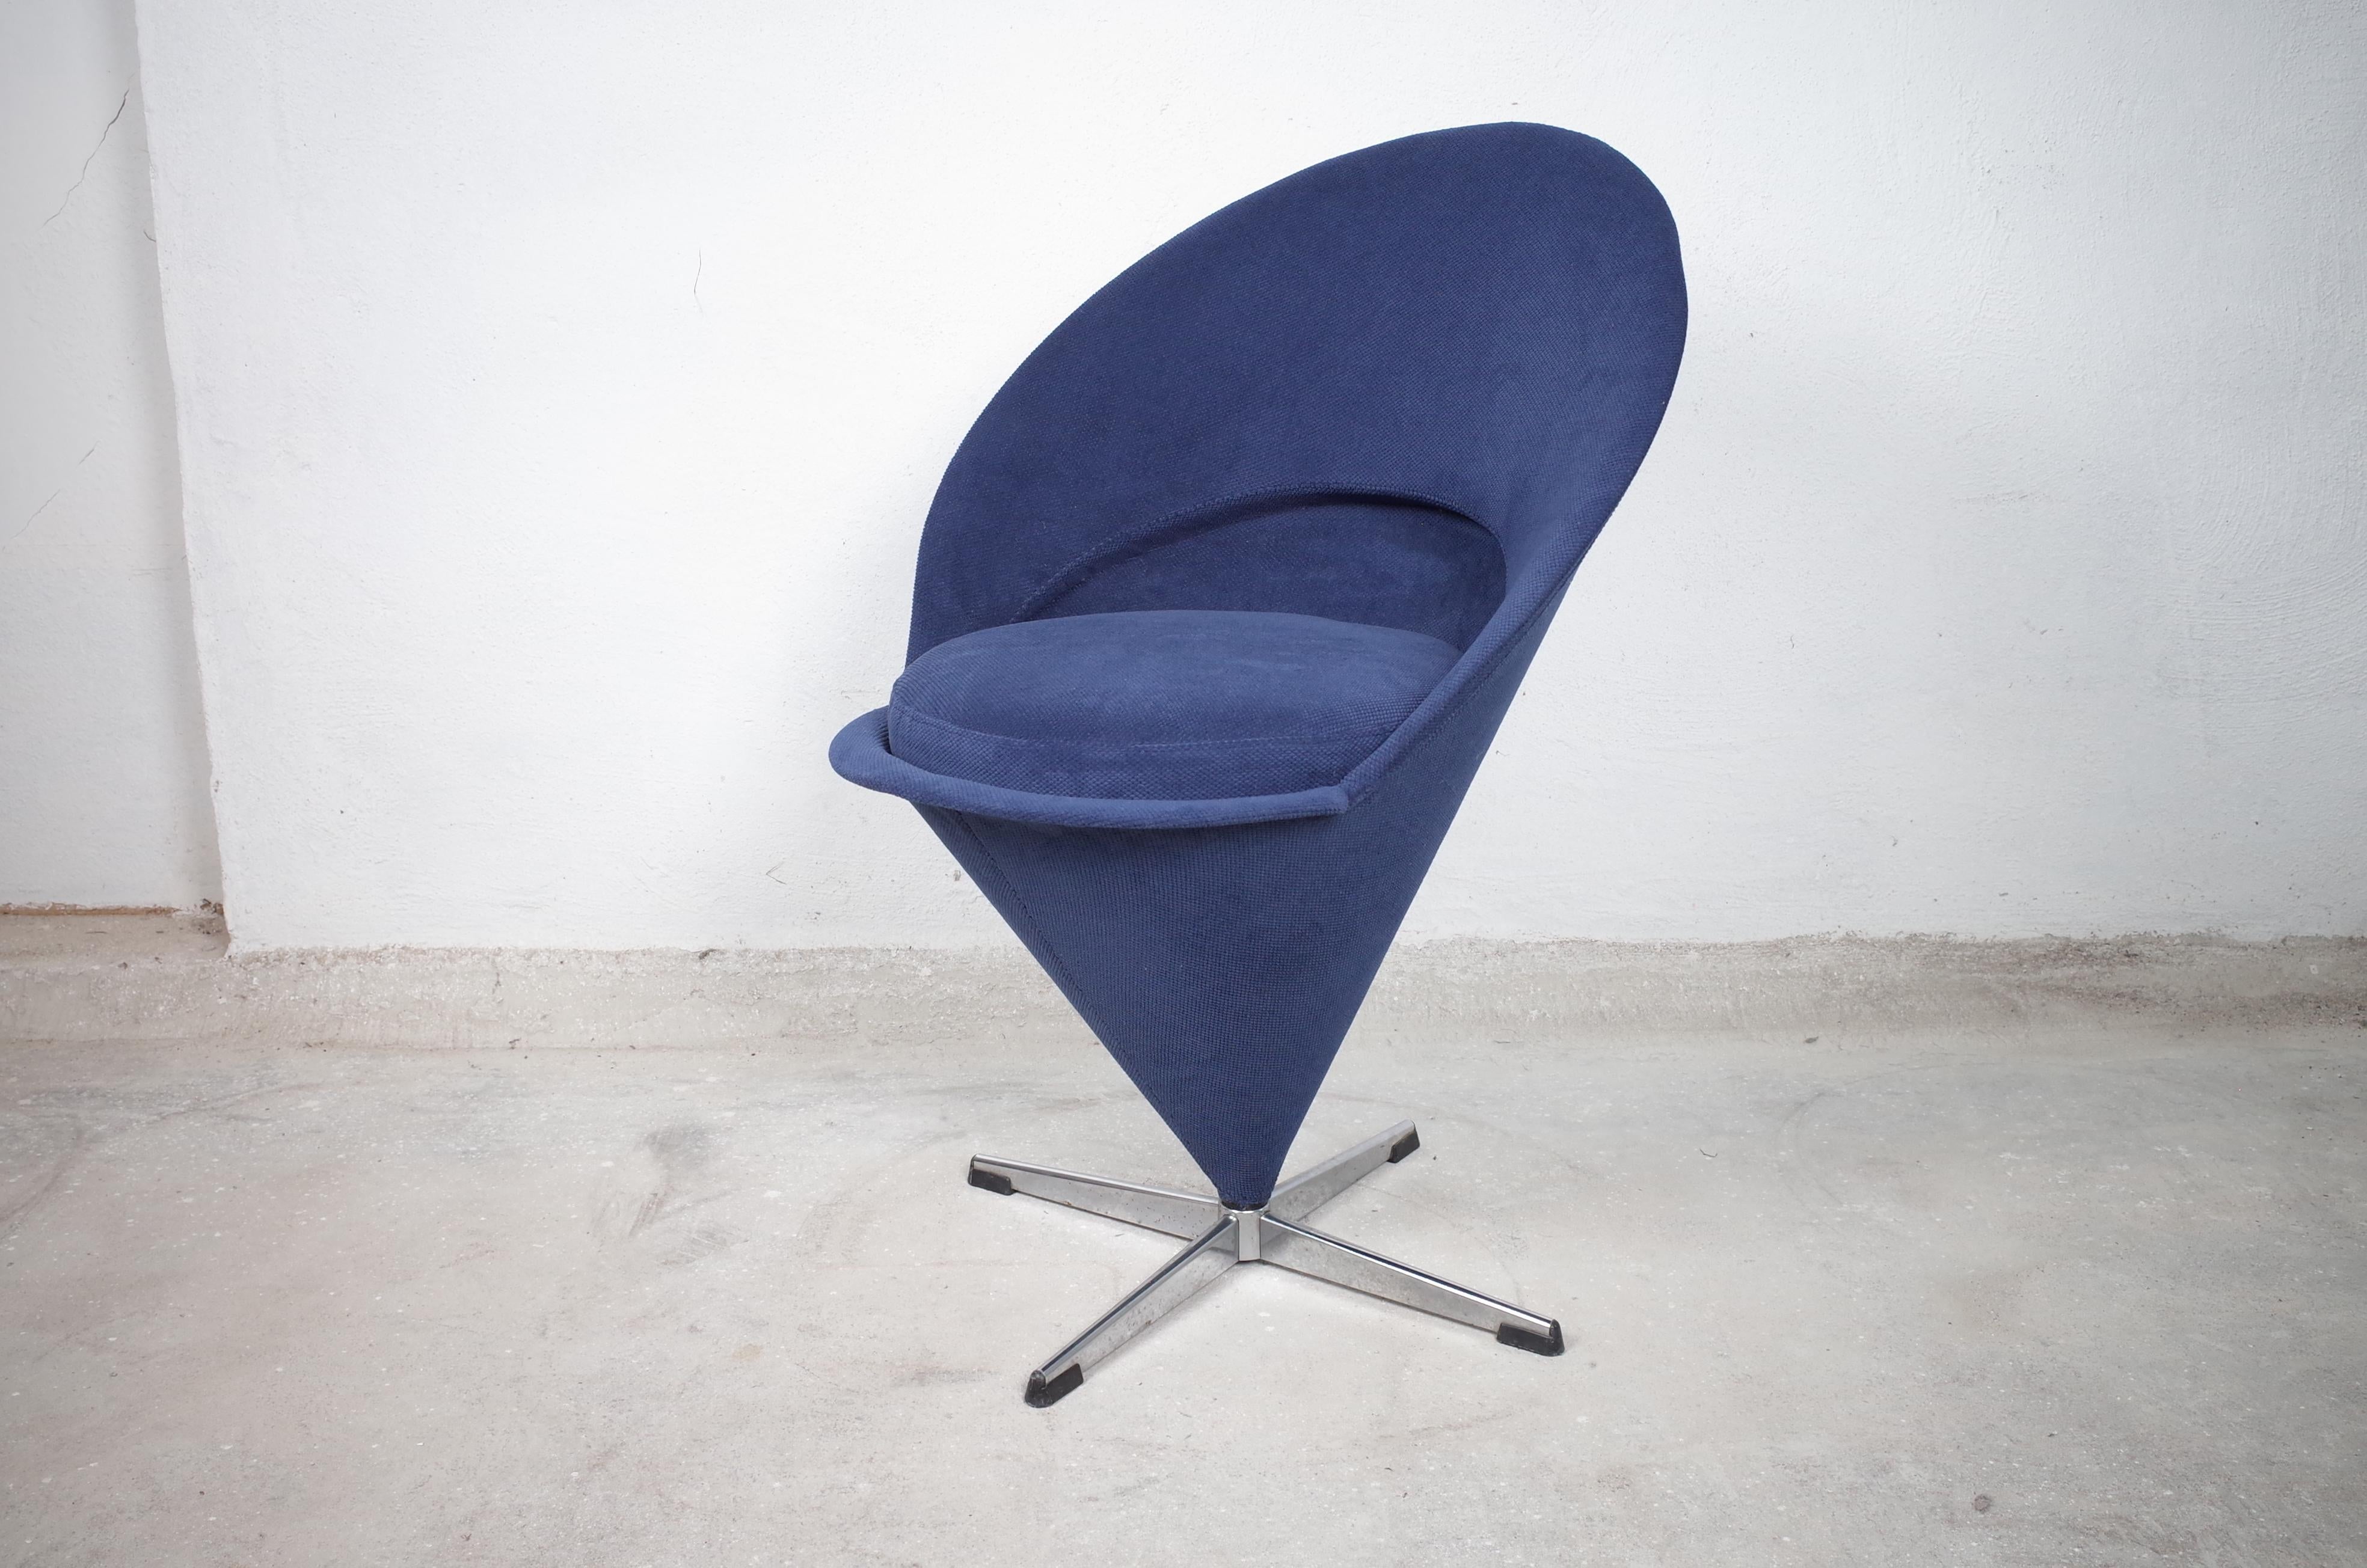 Mid-Century Modern Midcentury Blue Cone Chair by Verner Panton, 1960s For Sale